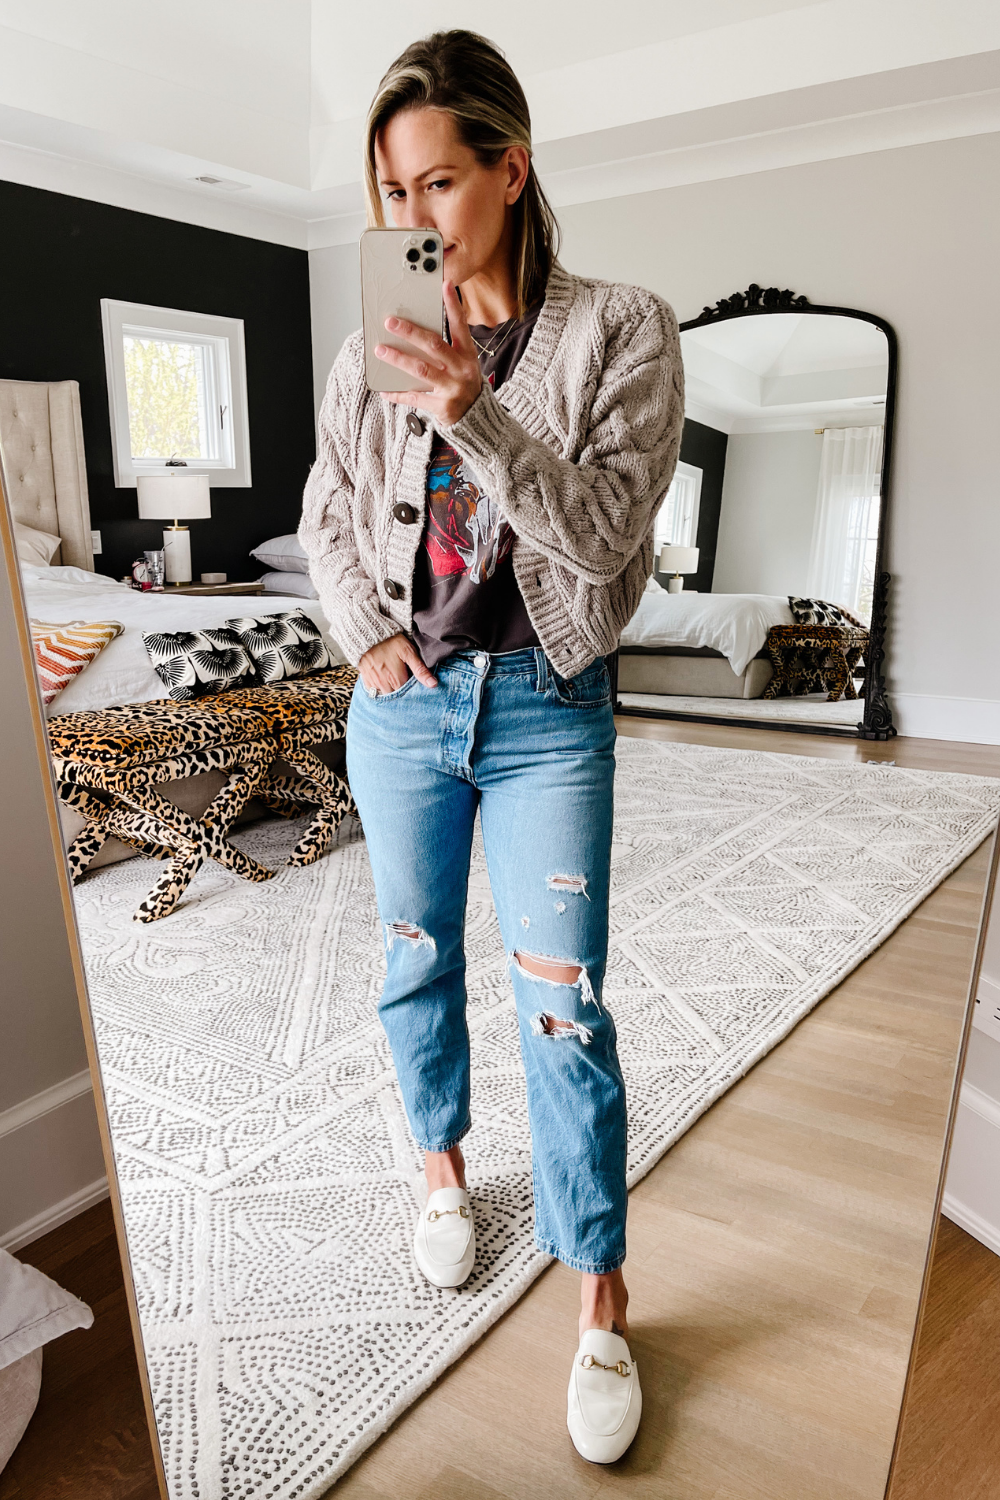 Suzanne wearing a graphic tee, cardigan, and denim jeans